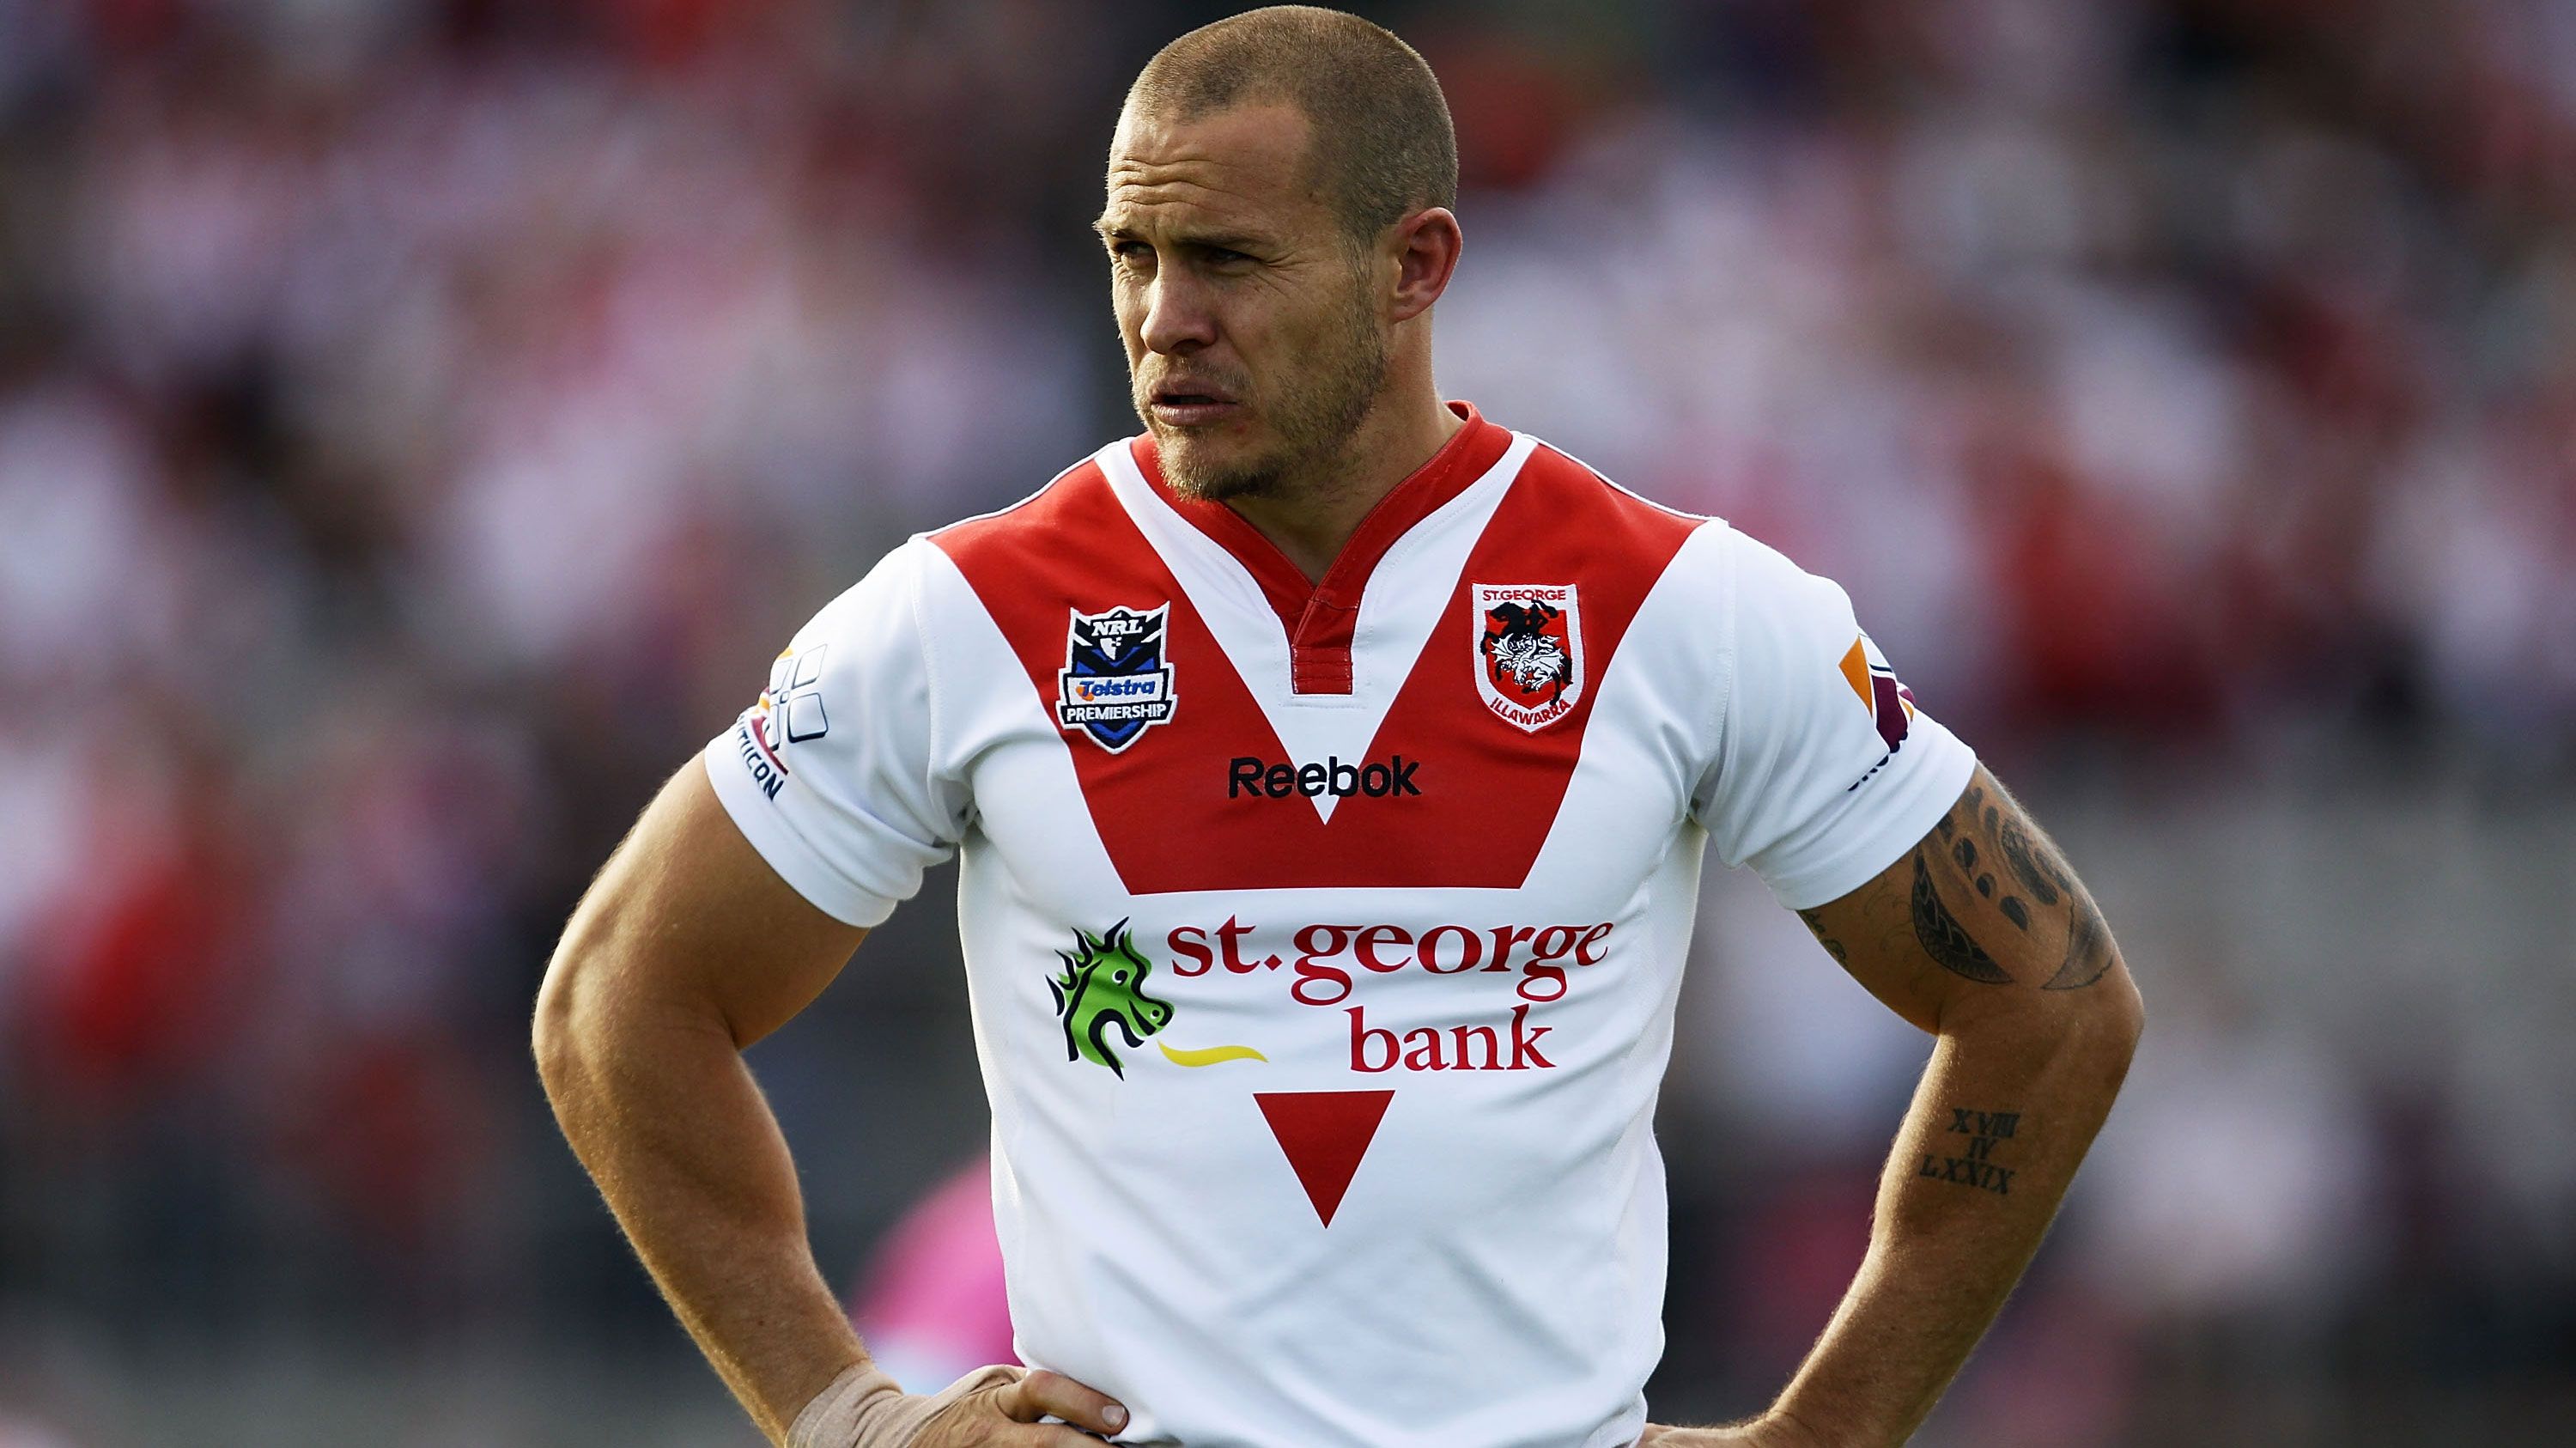 The Mole: Matt Cooper to spill on explosive Dragons feud after skipping premiership reunion